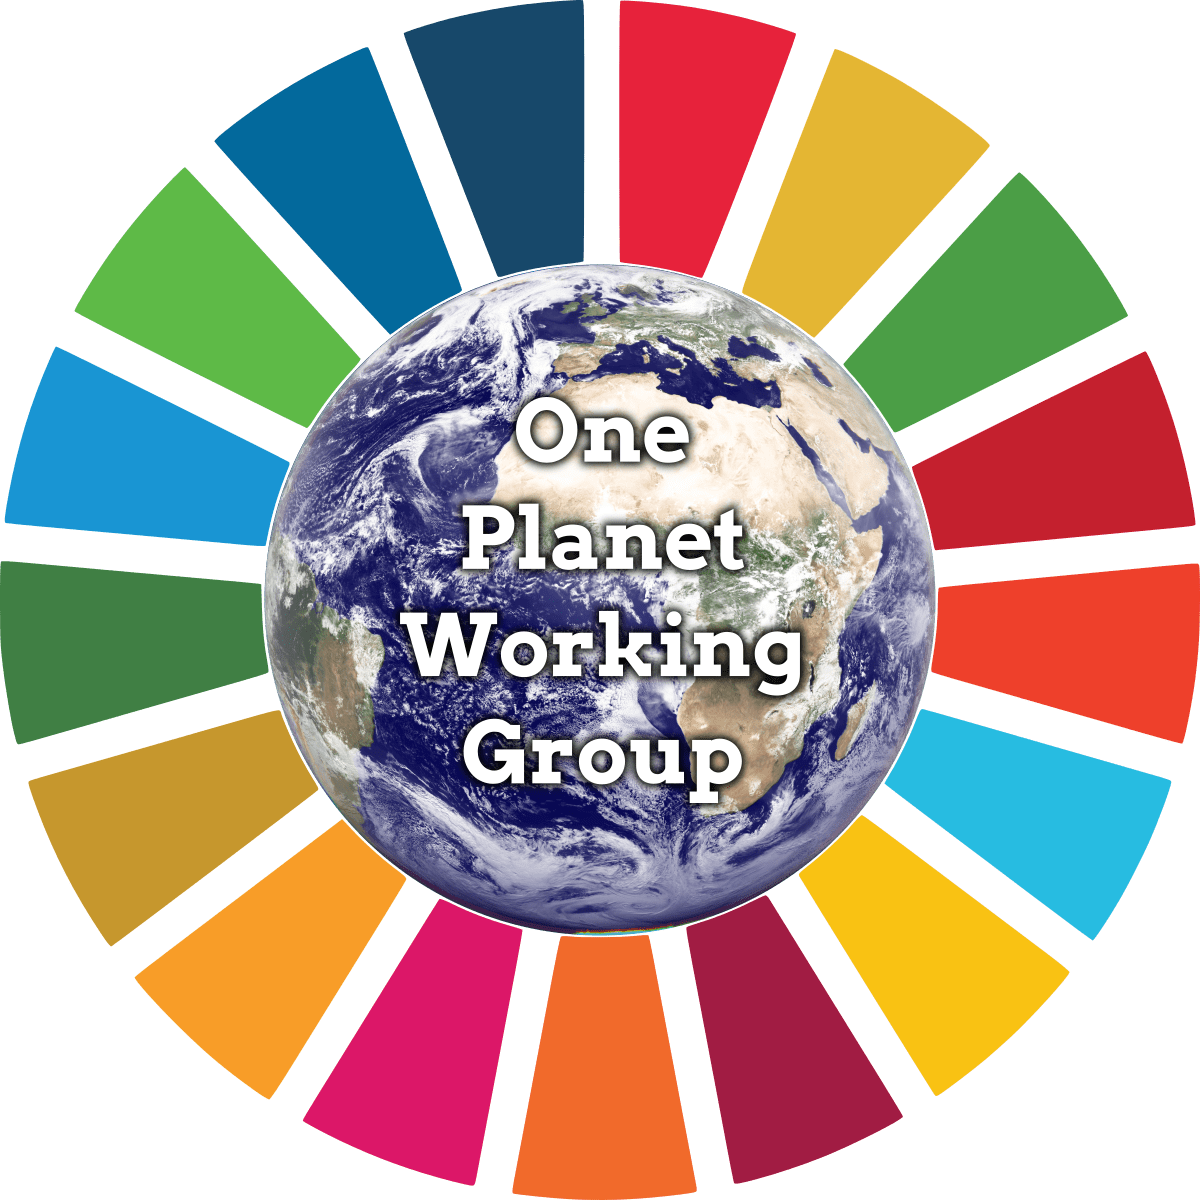 One Planet Working Group